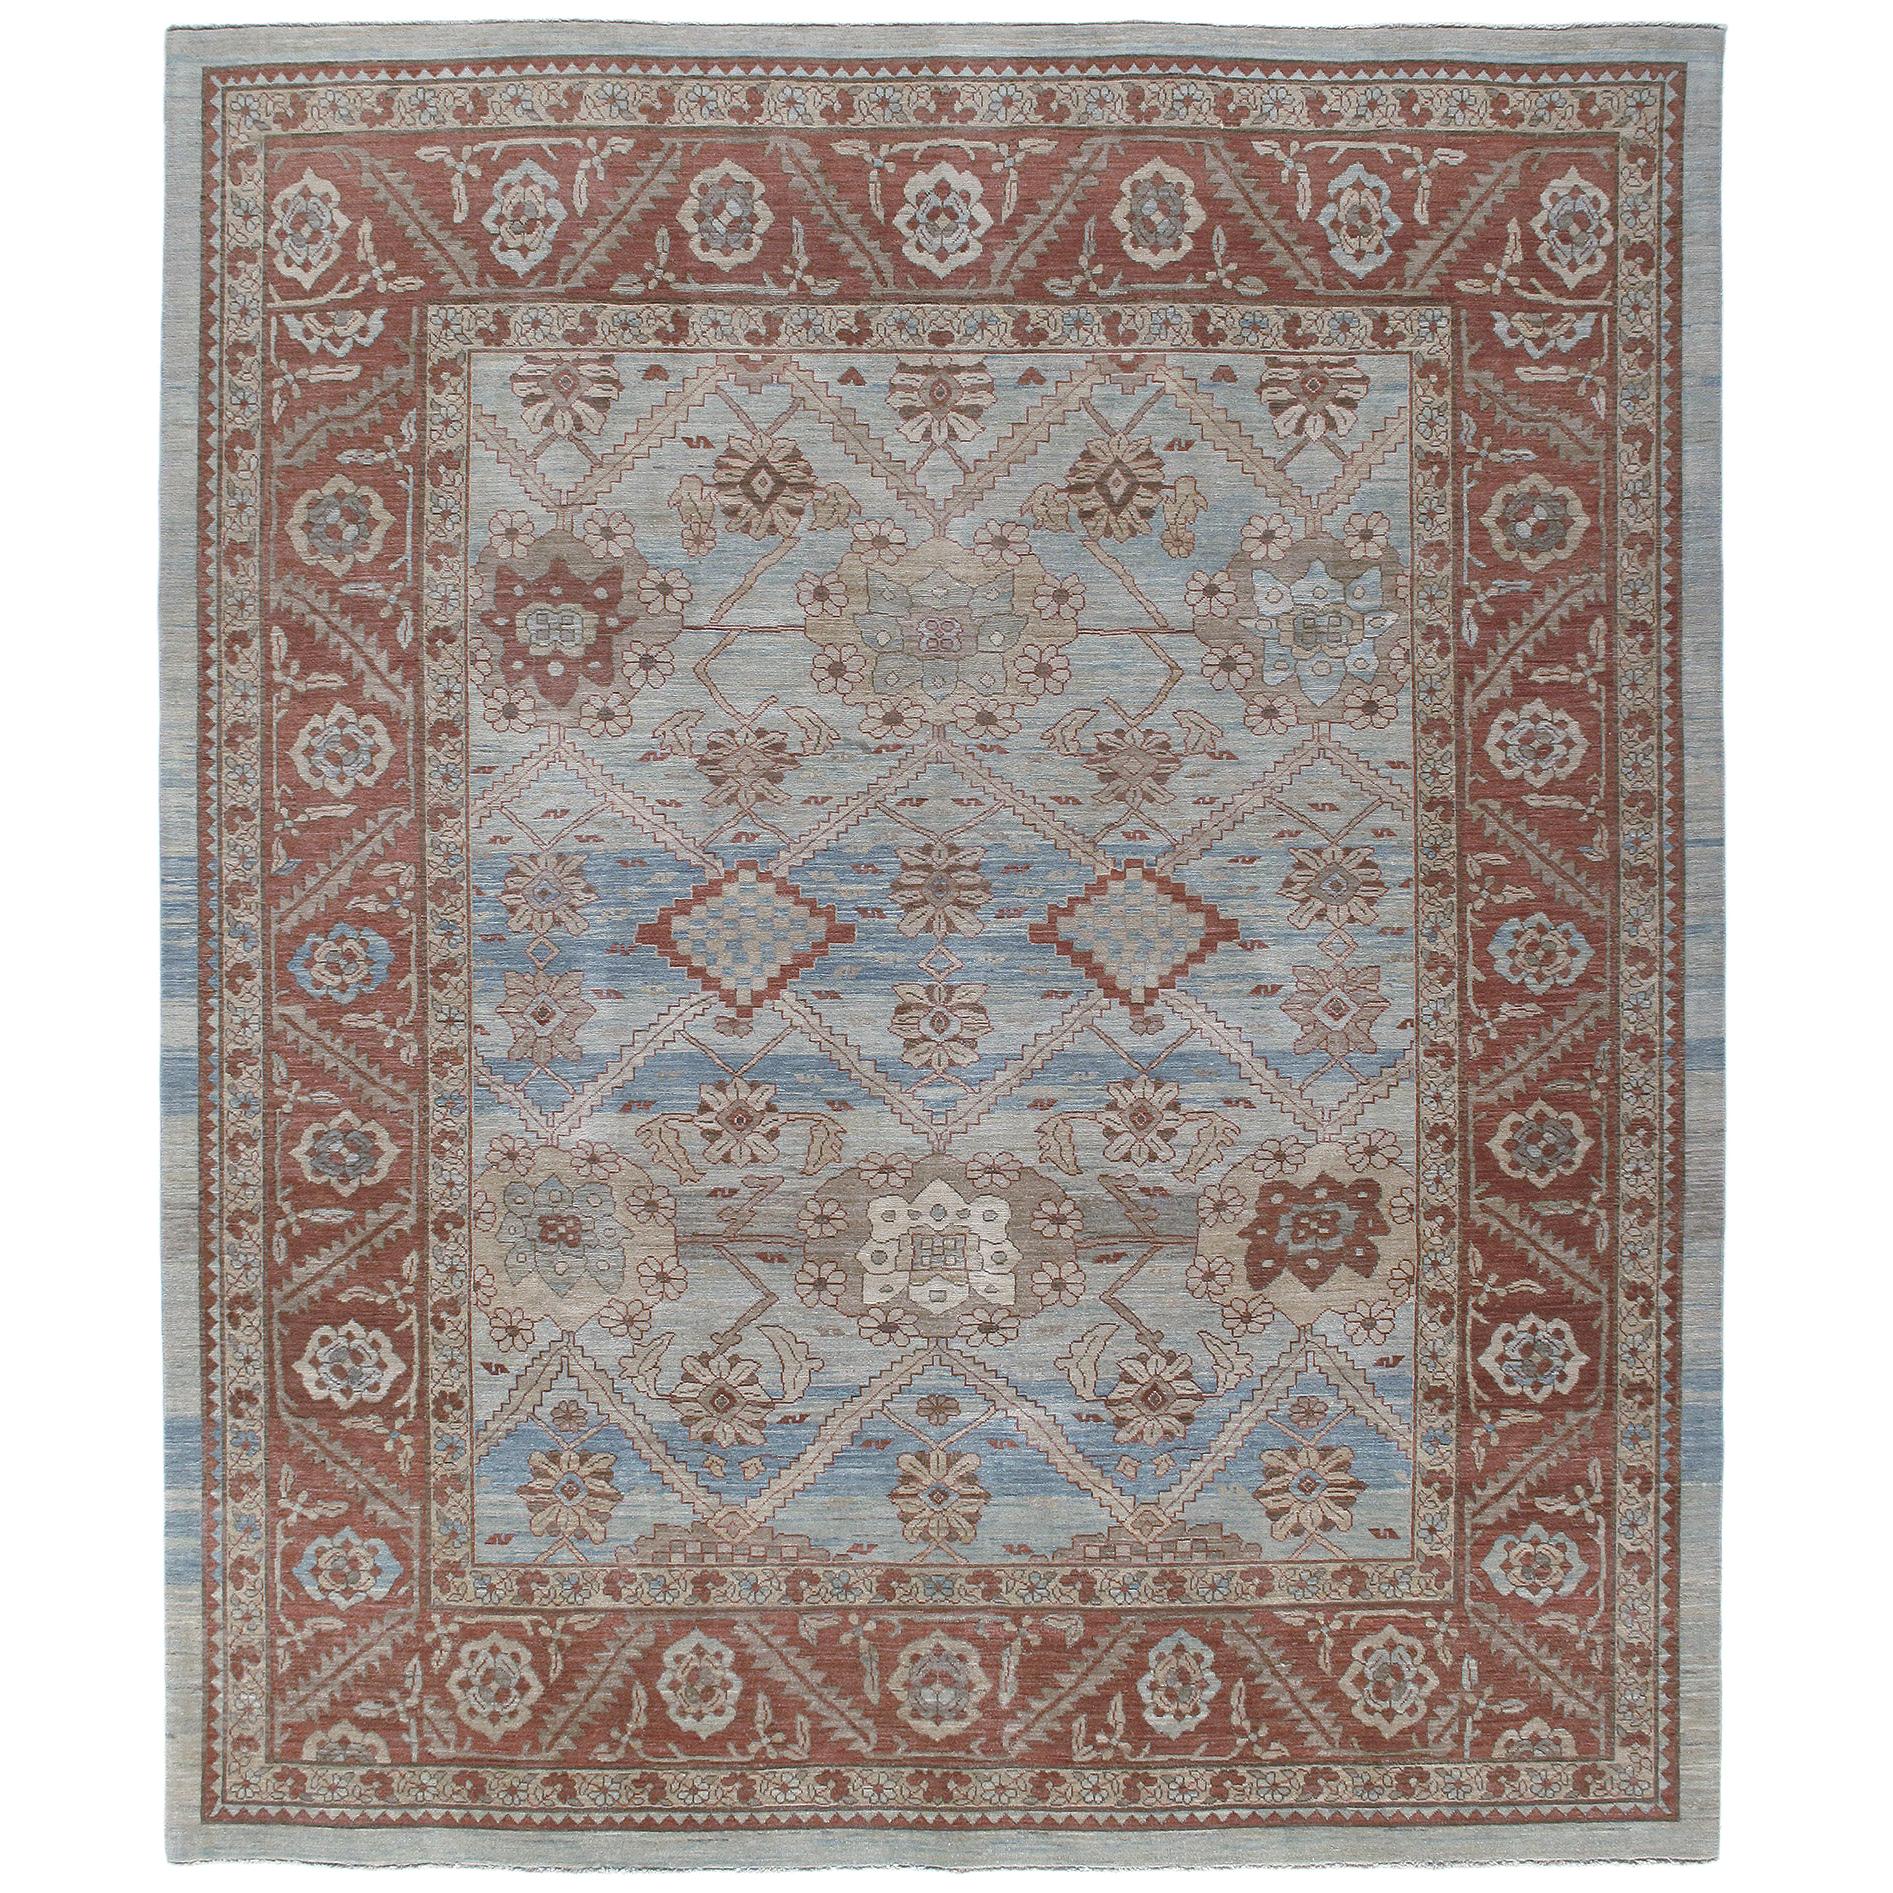 Persian Traditional Bakshaish Handknotted Rug in Pale Blue and Rust Color